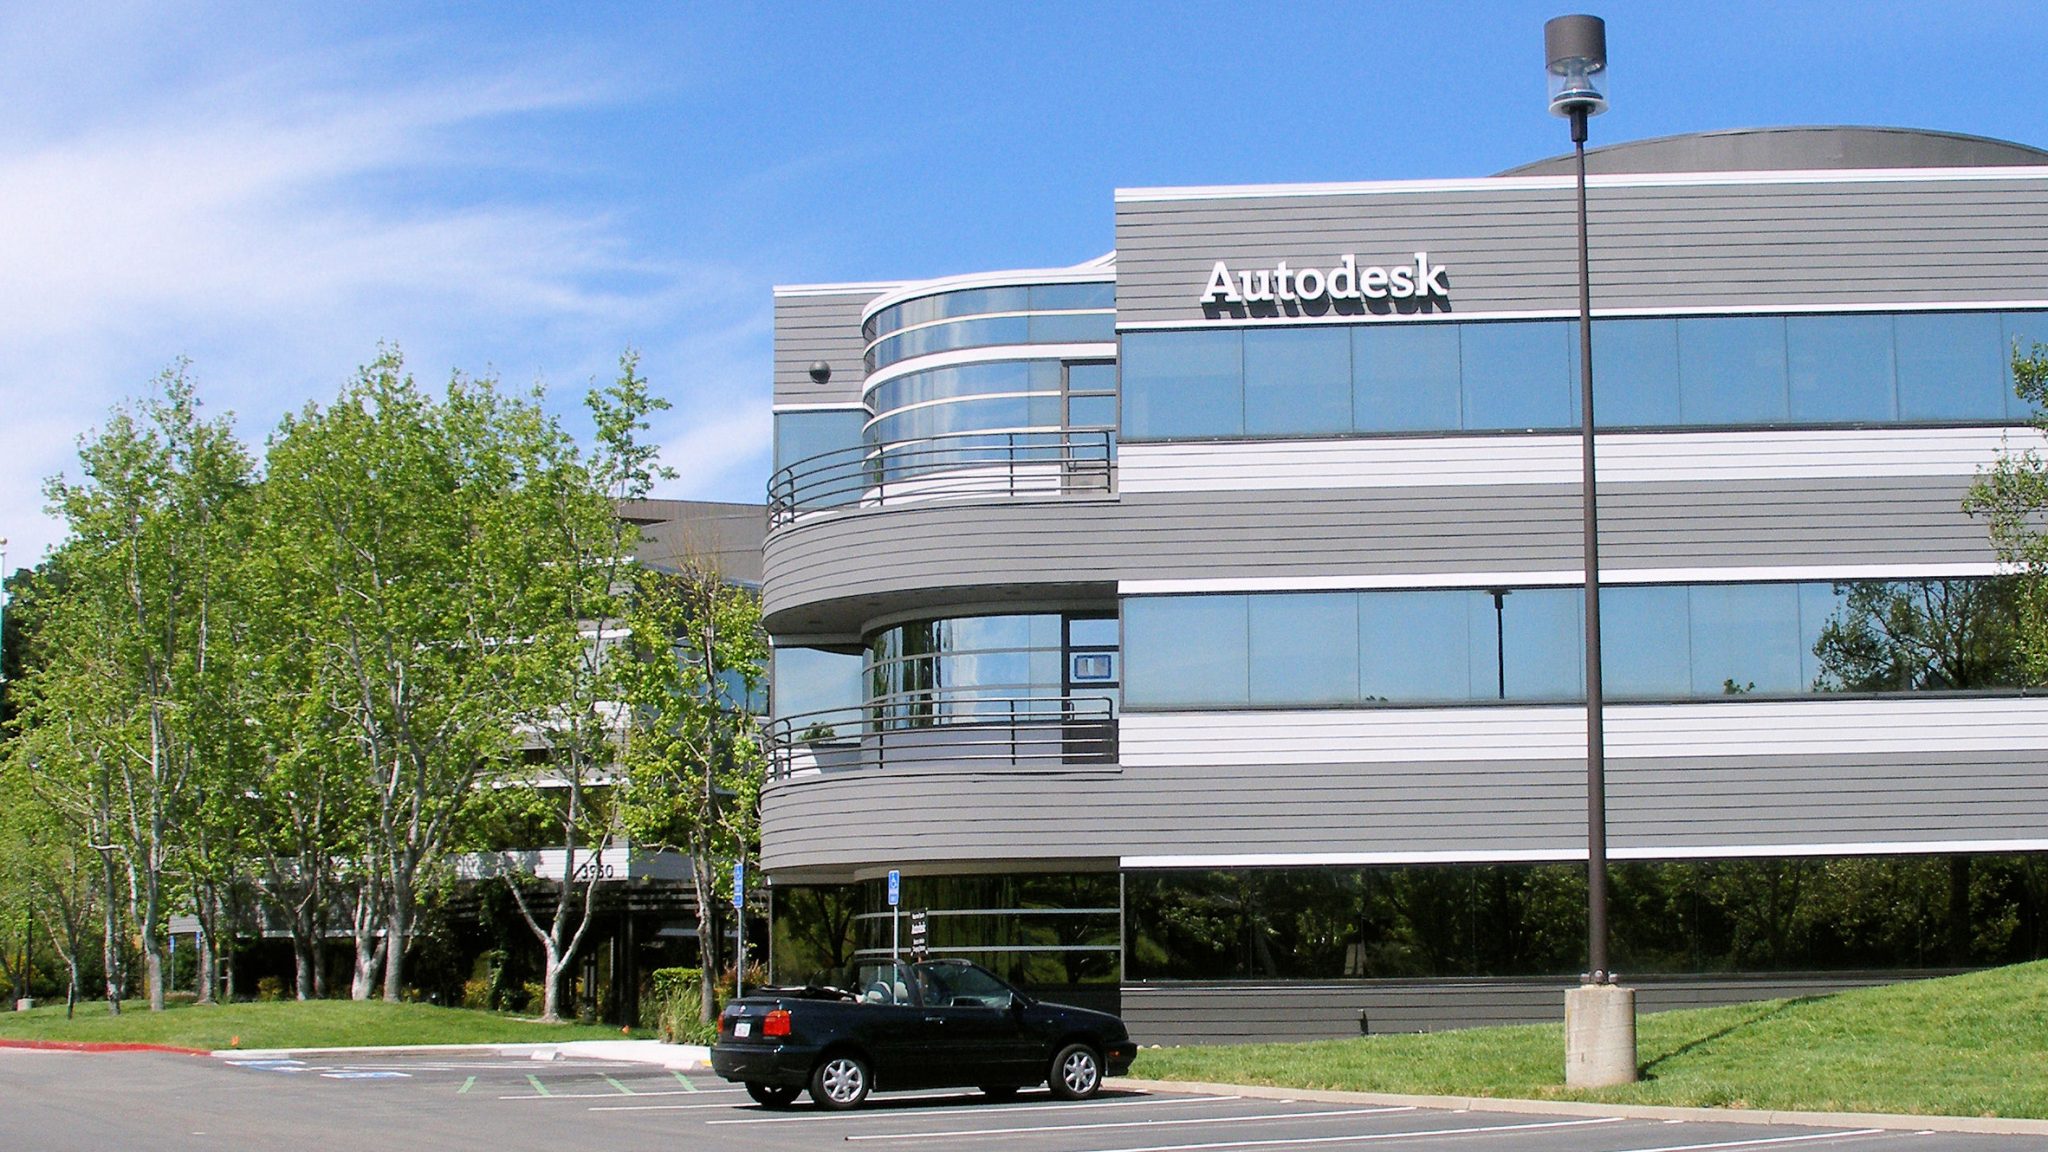 Listening to concerns “top priority” says Autodesk following architects’ criticism of BIM software